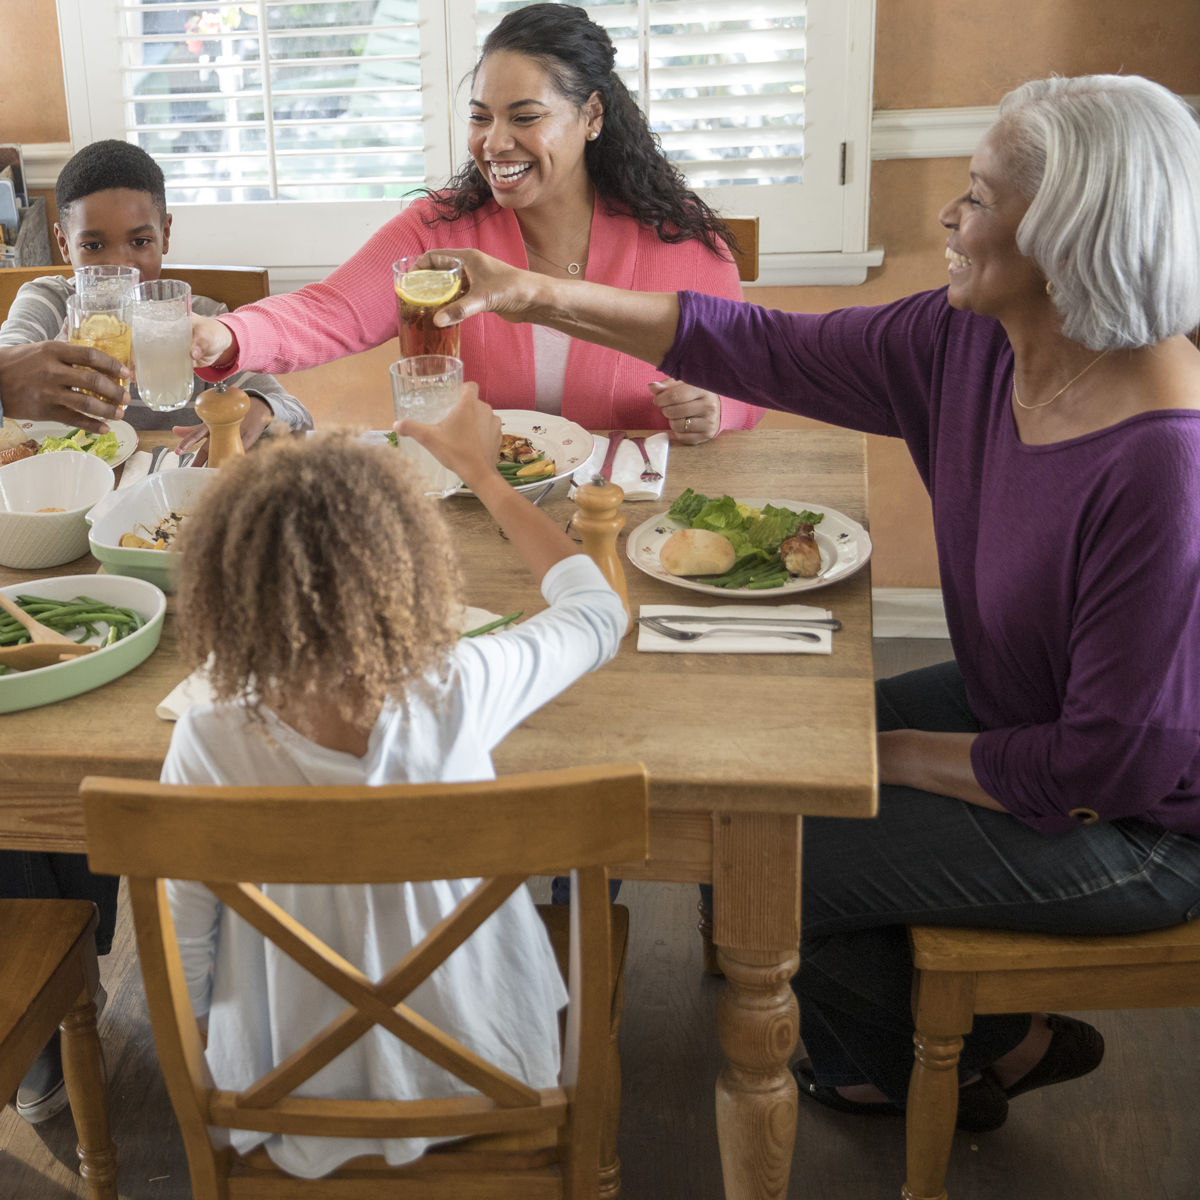 A family gathers around a table for dinner.